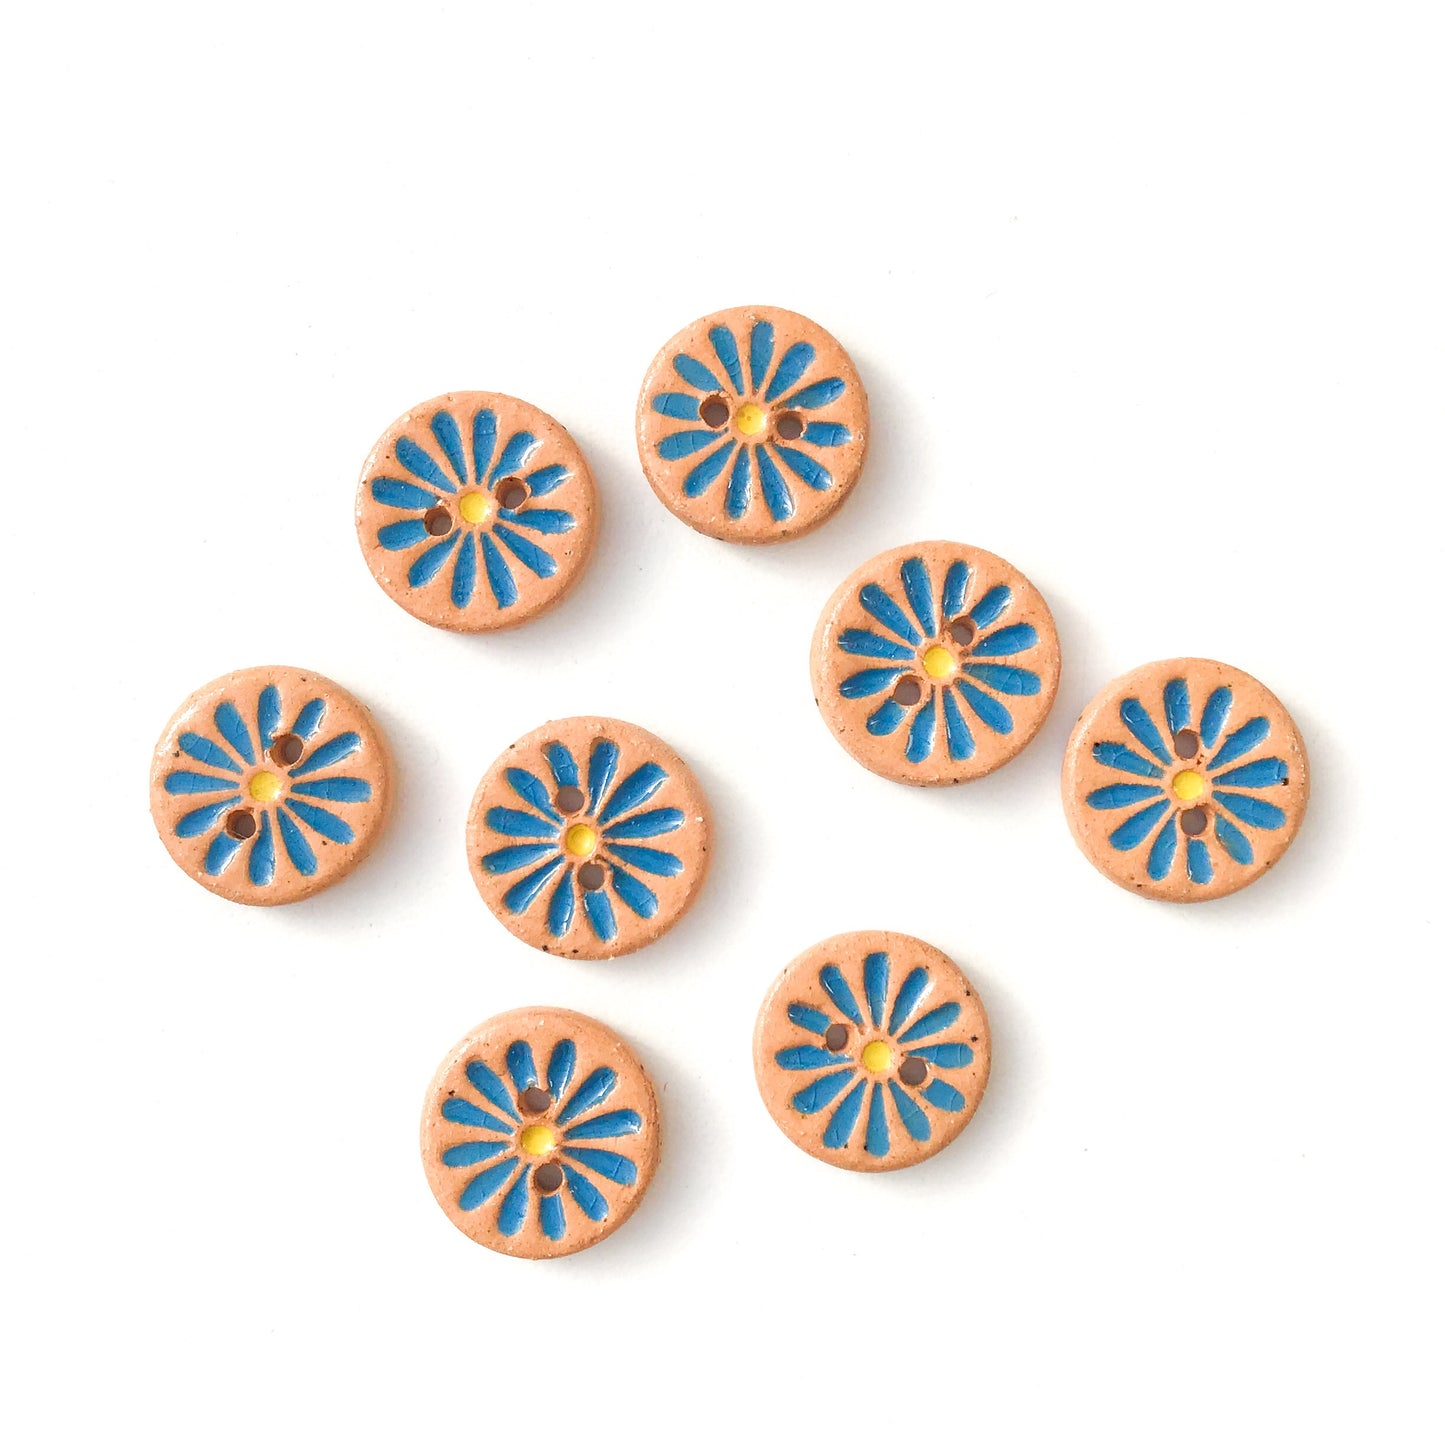 Bright Blue Daisy Buttons on Brown Clay - Ceramic Flower Buttons - 9/16" - 8 Pack (ws-12)